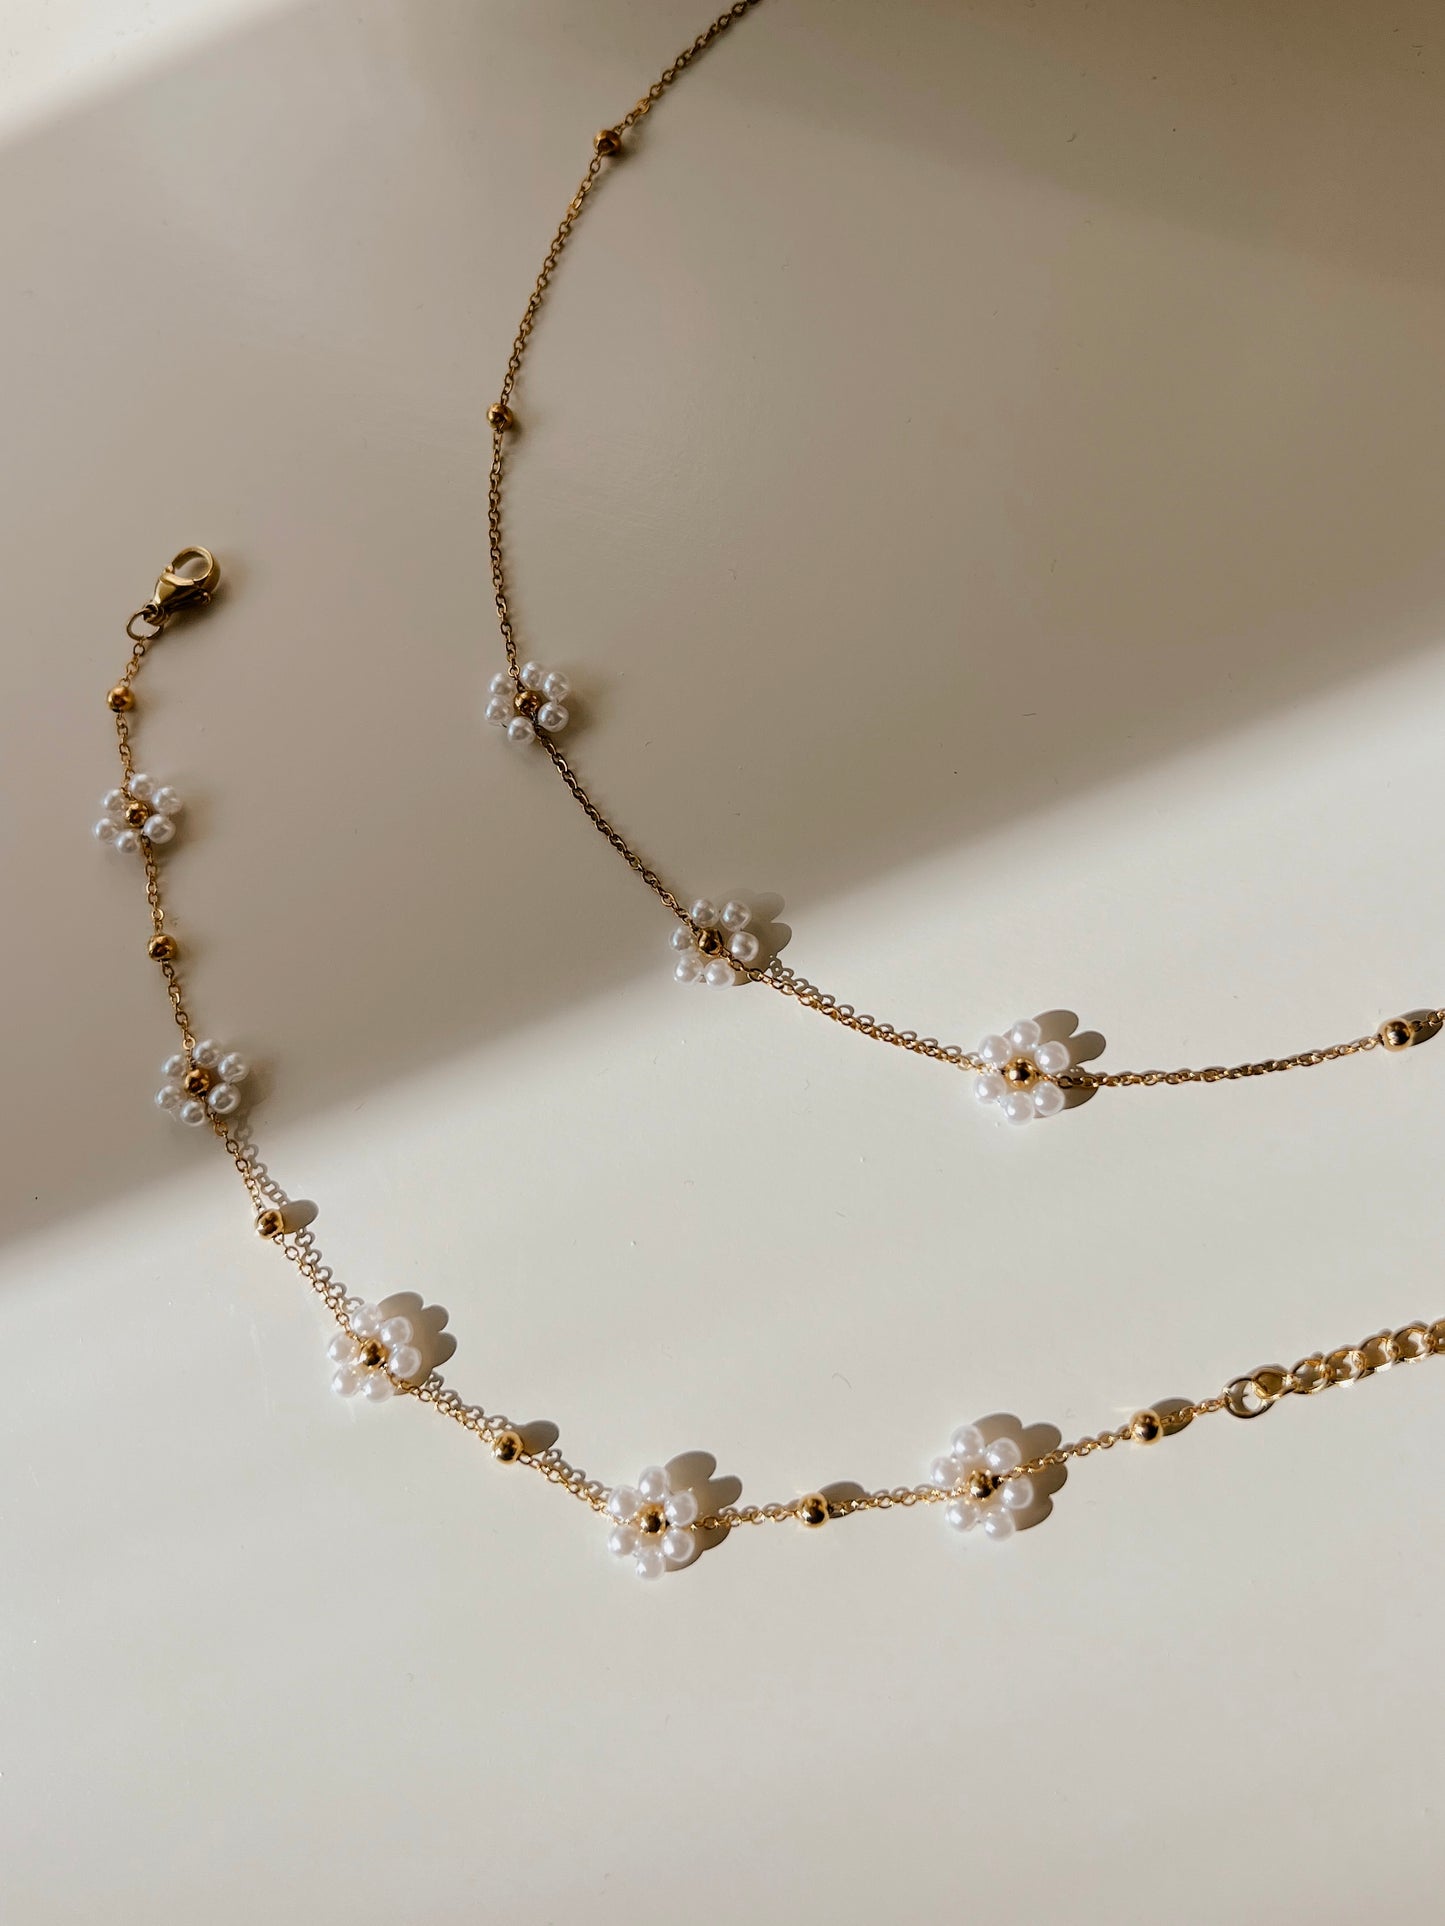 Pearly flower necklace and bracelet